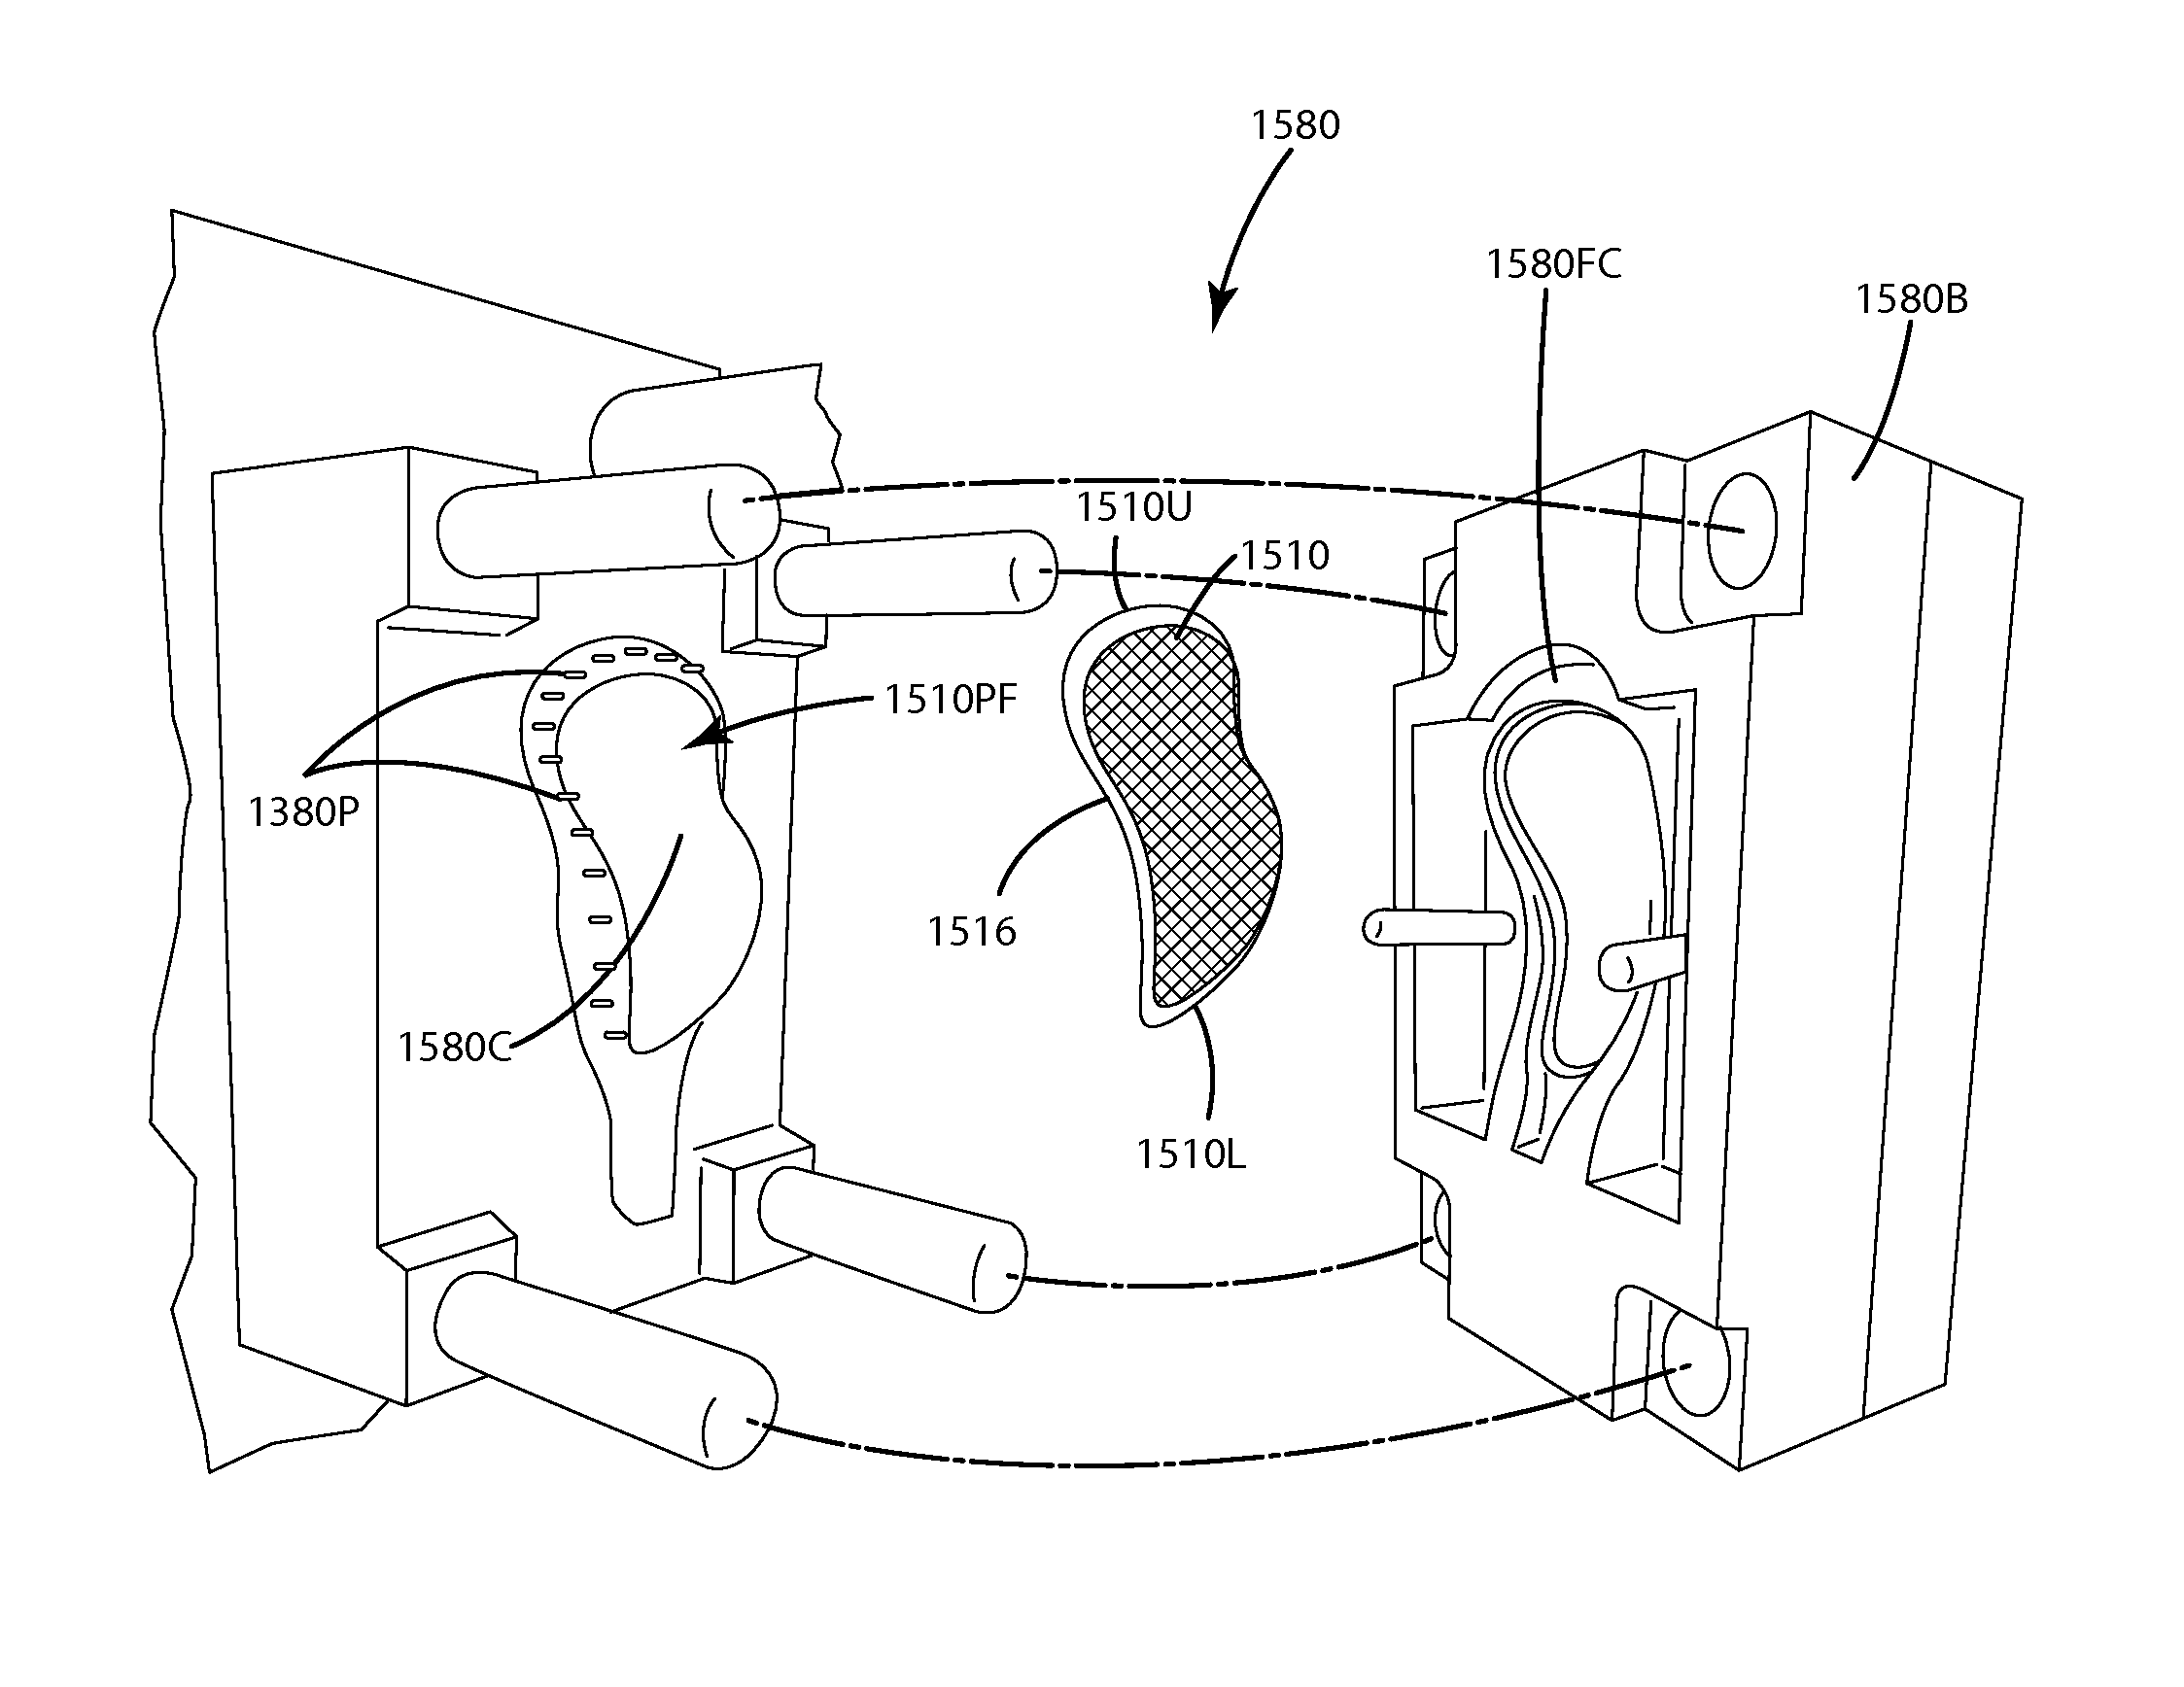 Lacrosse head pocket and related method of manufacture